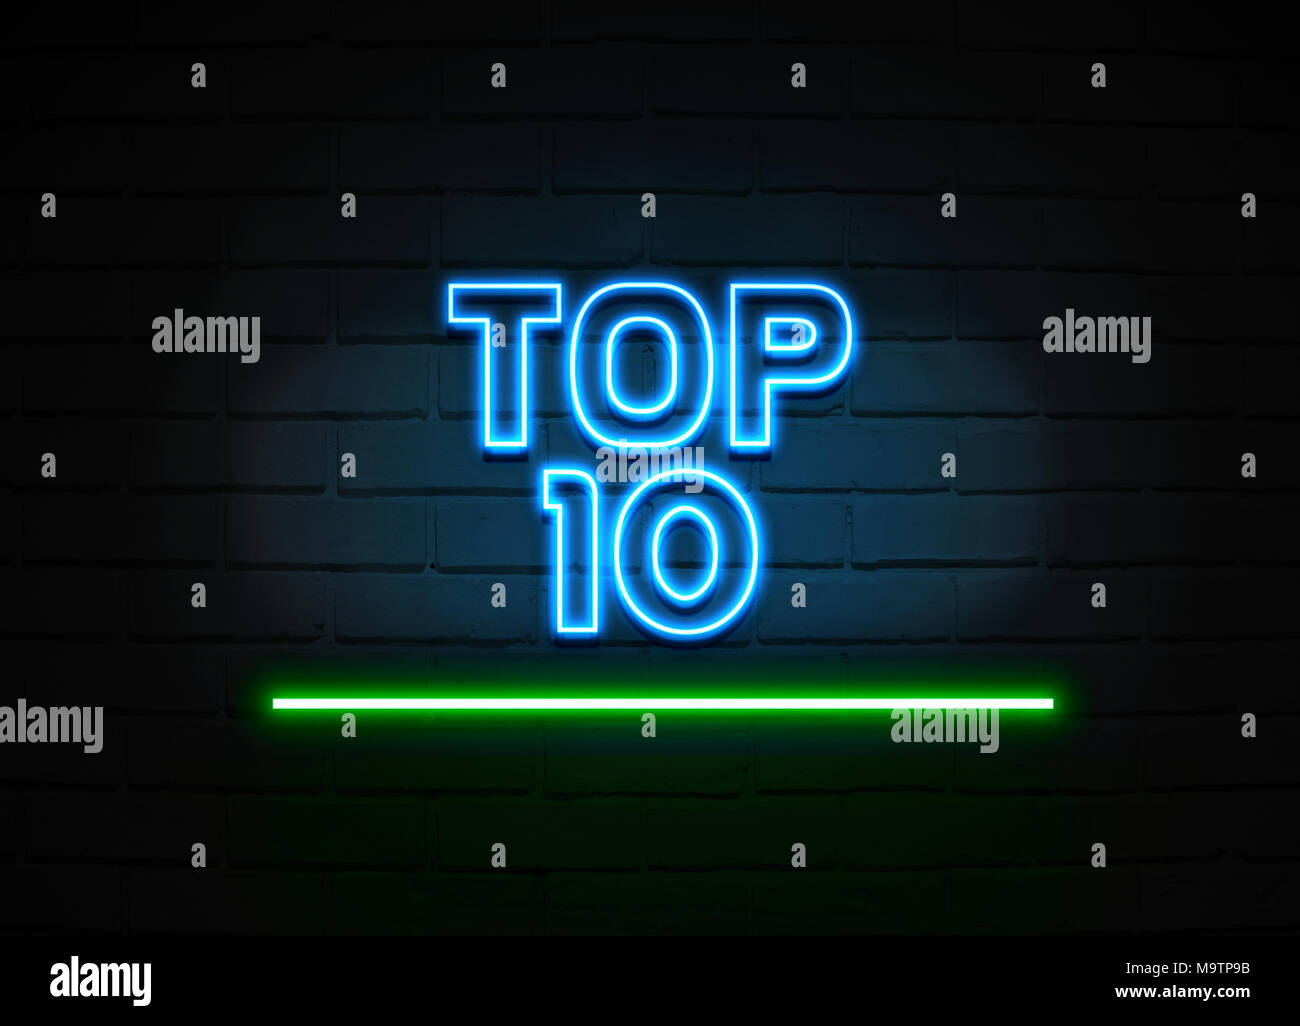 Top 10 neon sign - Glowing Neon Sign on brickwall wall - 3D rendered royalty free stock illustration. Stock Photo